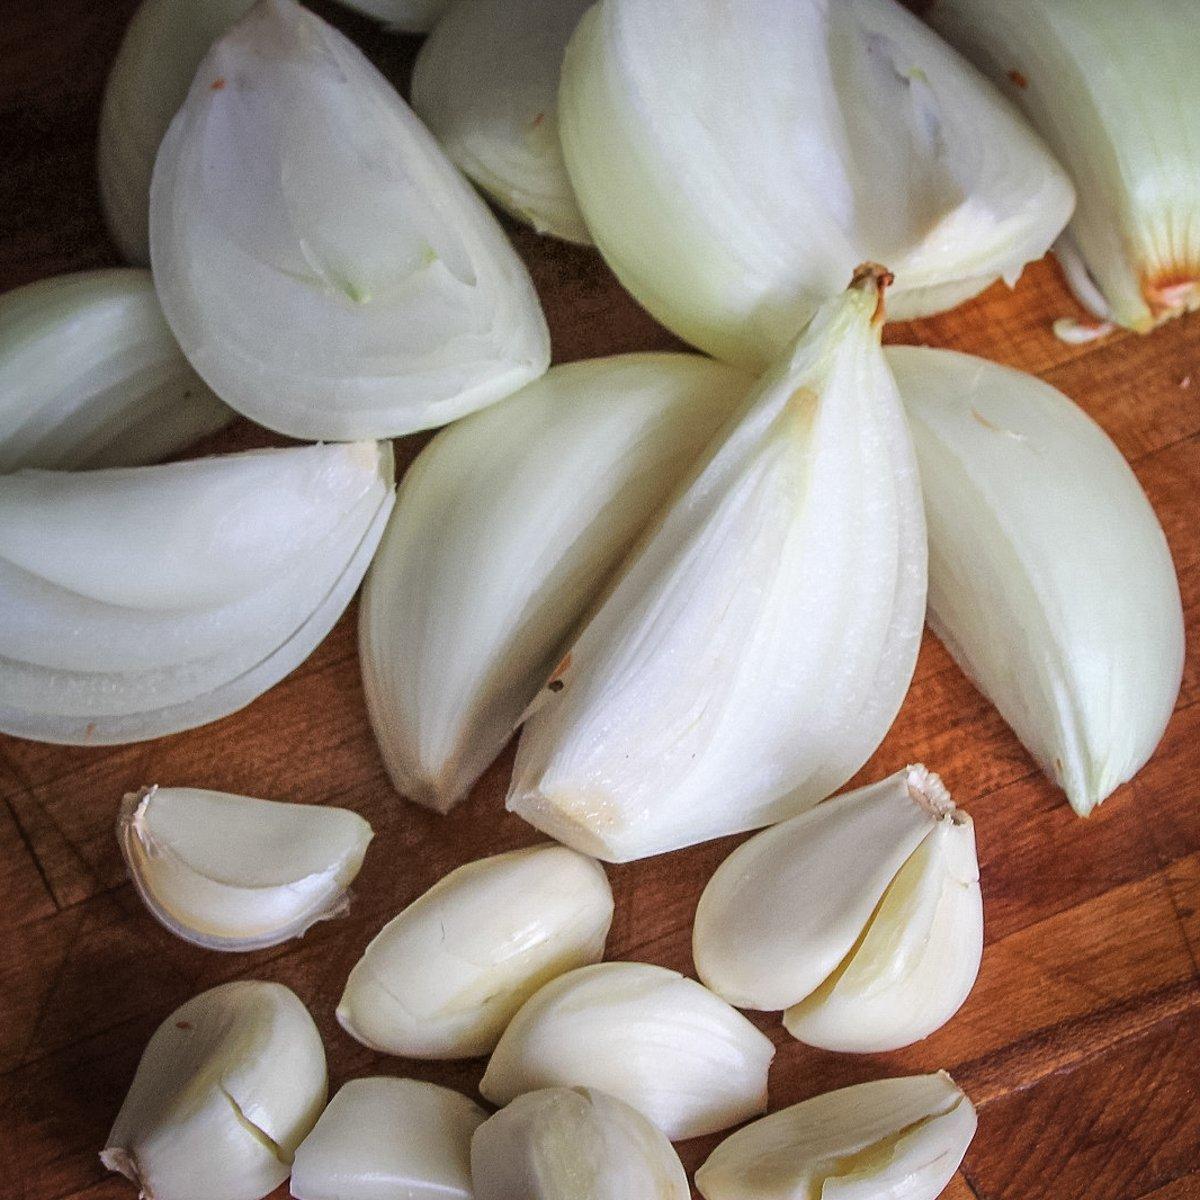 Start with garlic and onions for plenty of flavor.